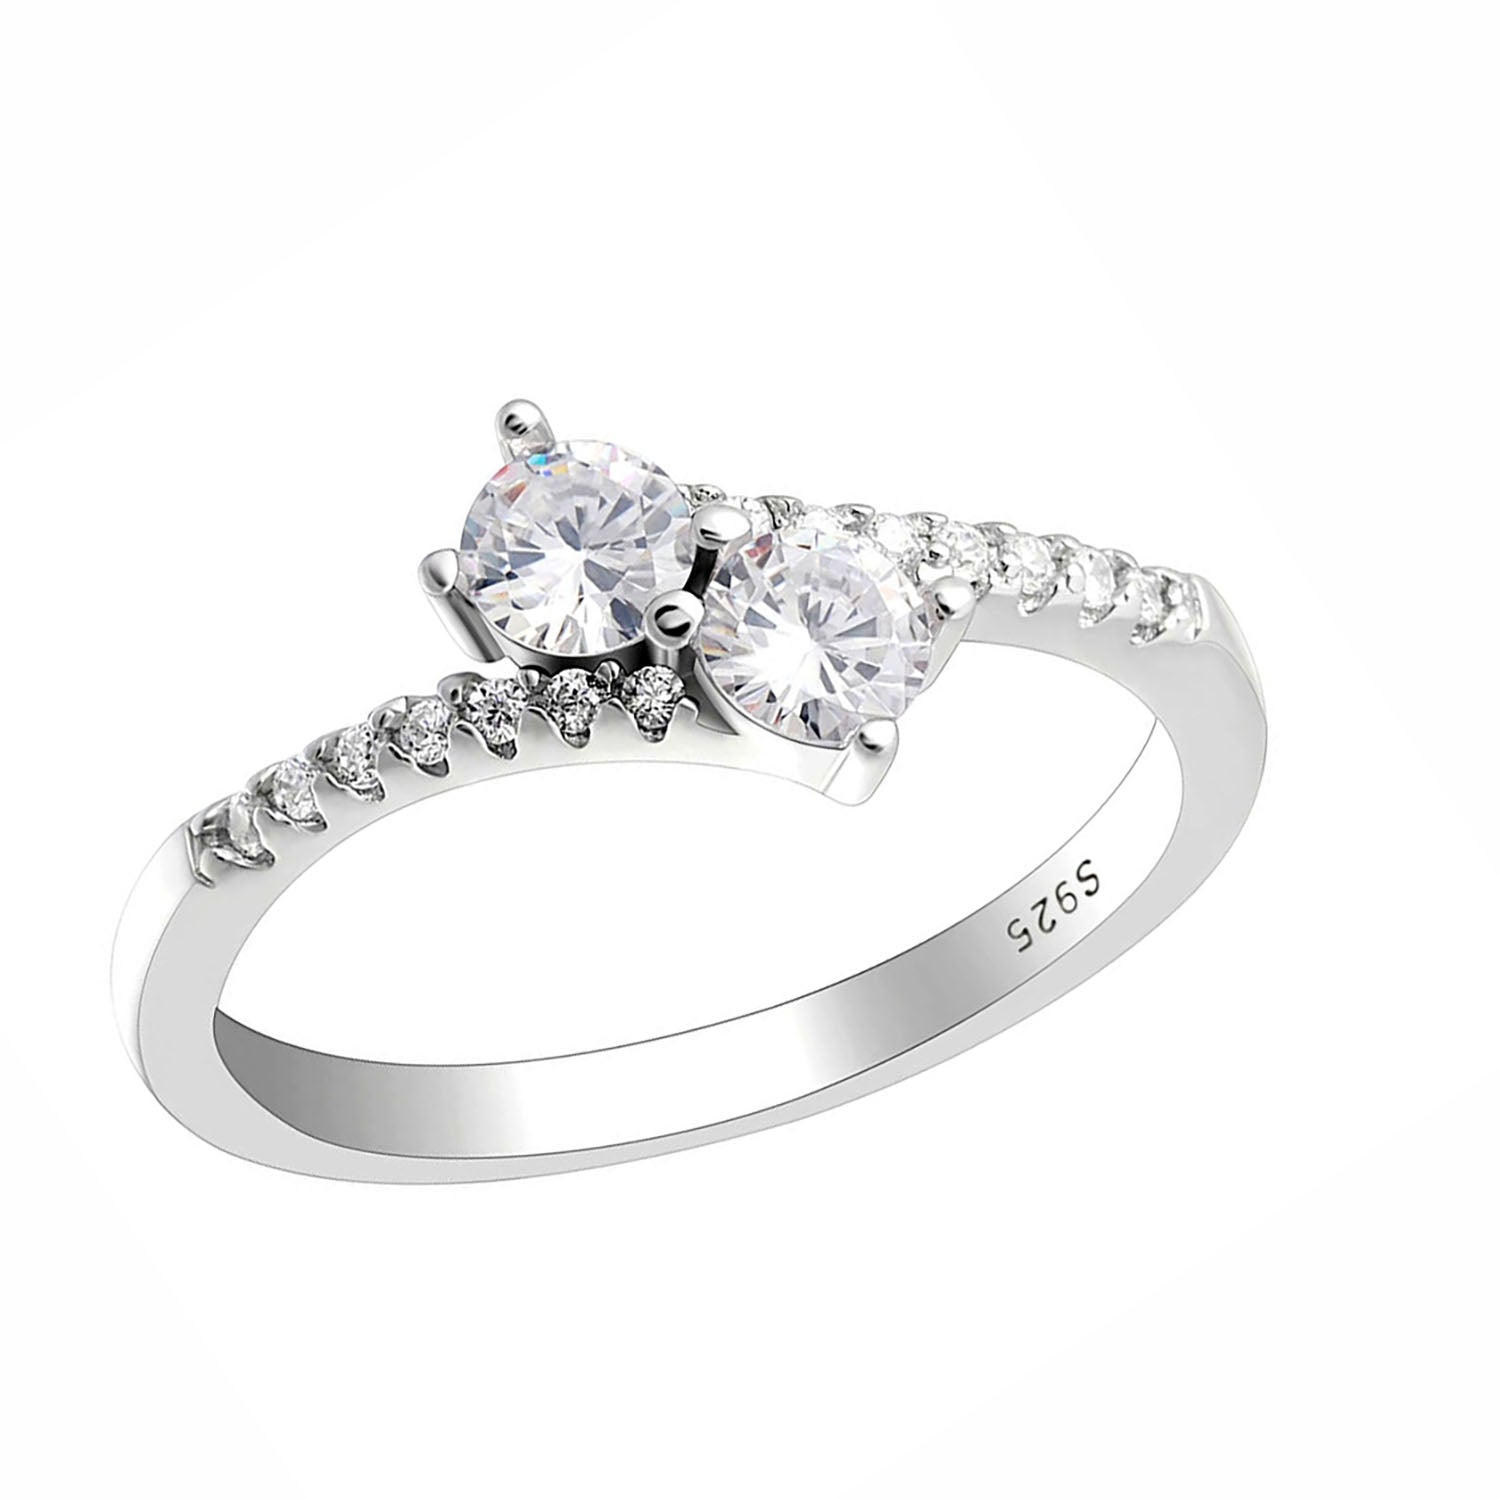 Tatiana Engagement Ring Sterling Silver 2 Stone Cz Womens Ginger Lyne Collection - 4